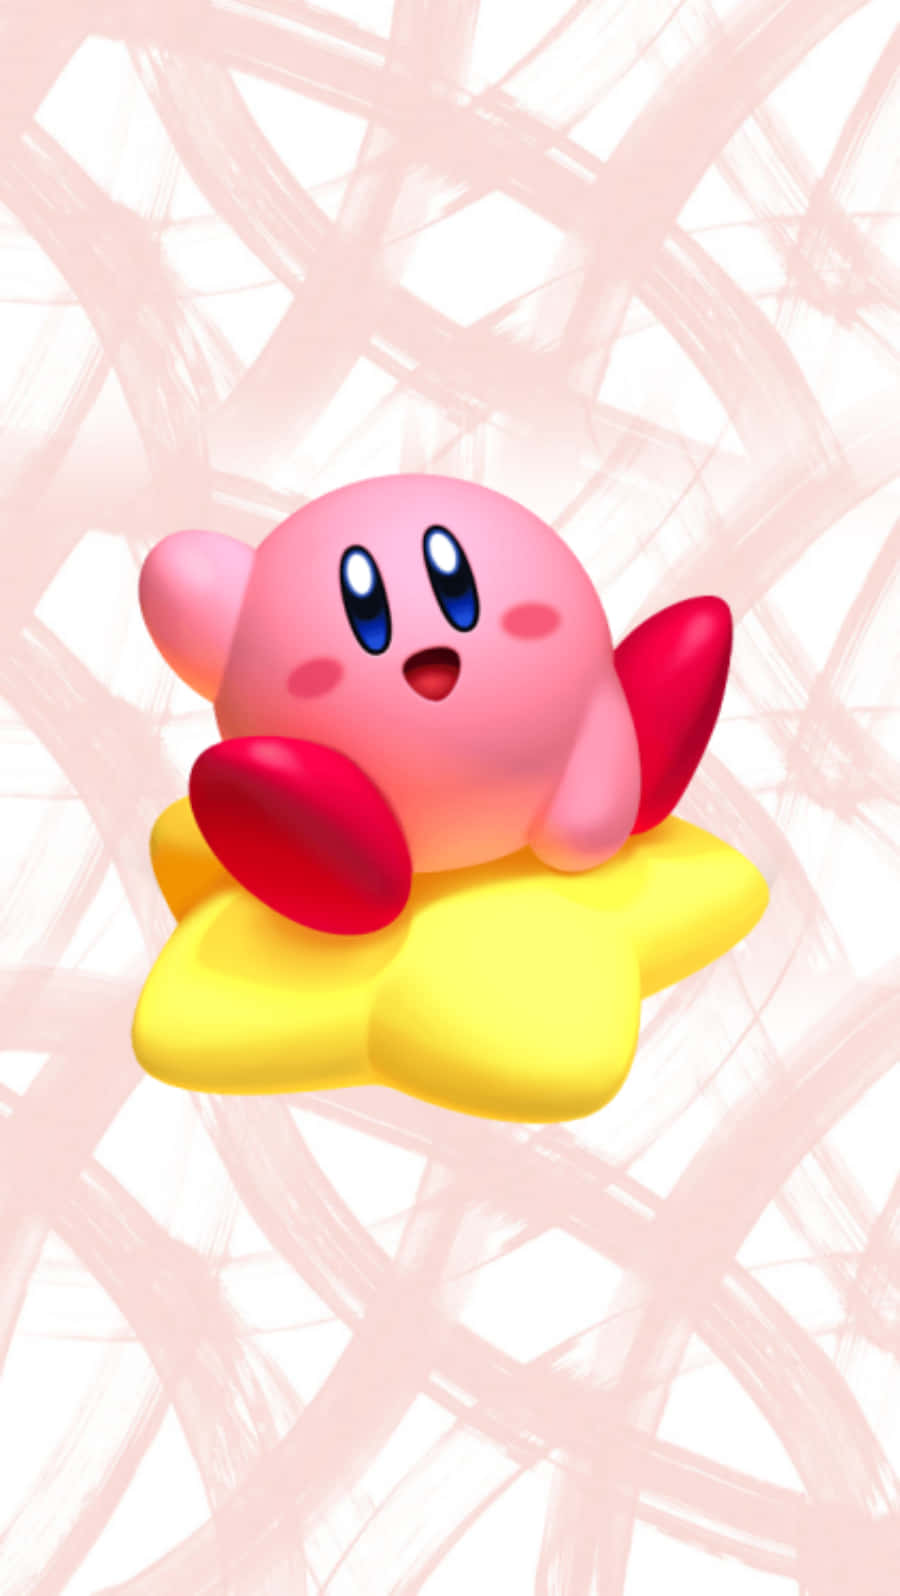 Look at this adorable Kirby character!